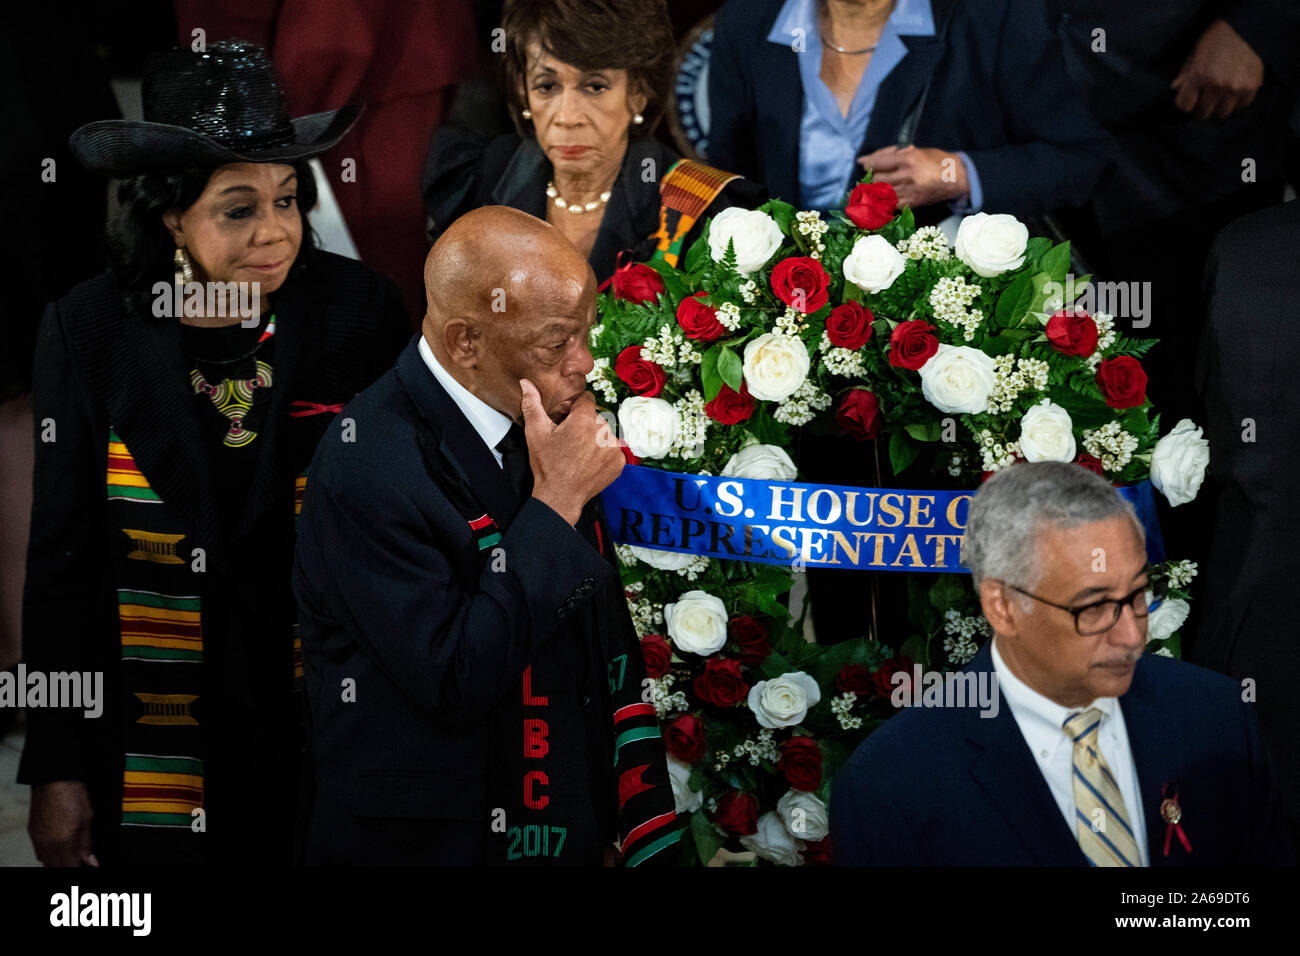 Washington DC, USA. 24th Oct 2019. United States Representative Maxine Waters (Democrat of California), top, US Representative Frederica Wilson (Democrat of Florida), left, US Representative John Lewis (Democrat of Georgia), and US Representative Robert Scott (Democrat of Virginia), lower right, walk past the casket of late US Representative Elijah Cummings (Democrat of Maryland) during a memorial service in National Statuary Hall at the U.S. Capitol in Washington, DC, U.S., on Thursday, Oct. 24, 2019. Credit: dpa picture alliance/Alamy Live News Stock Photo